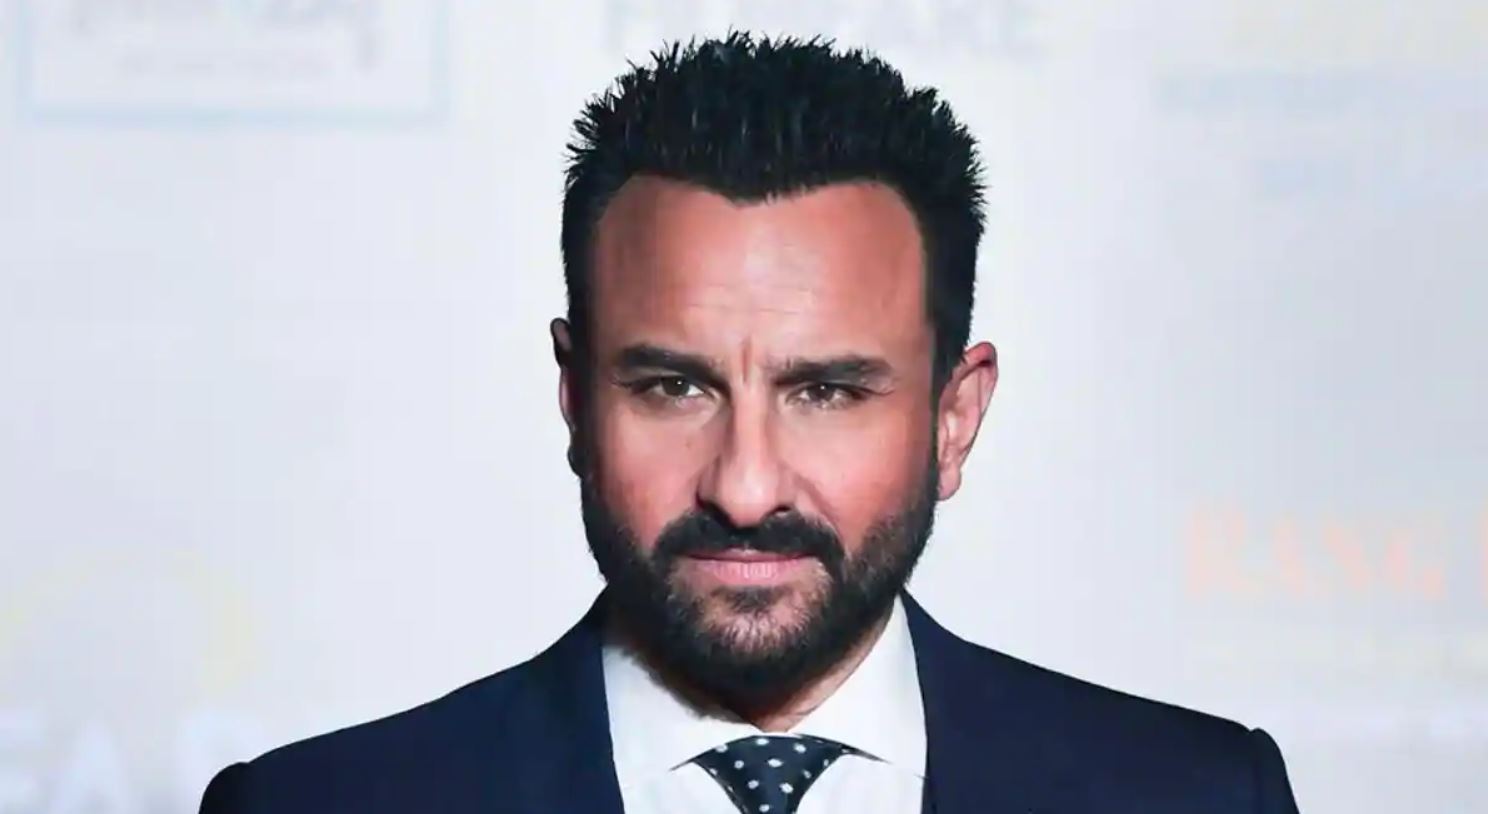 Saif Ali Khan Admits To Being 'A Bit Of A Ditch Both Mentally And Professionally', Says He Has Managed To Get Out Of It